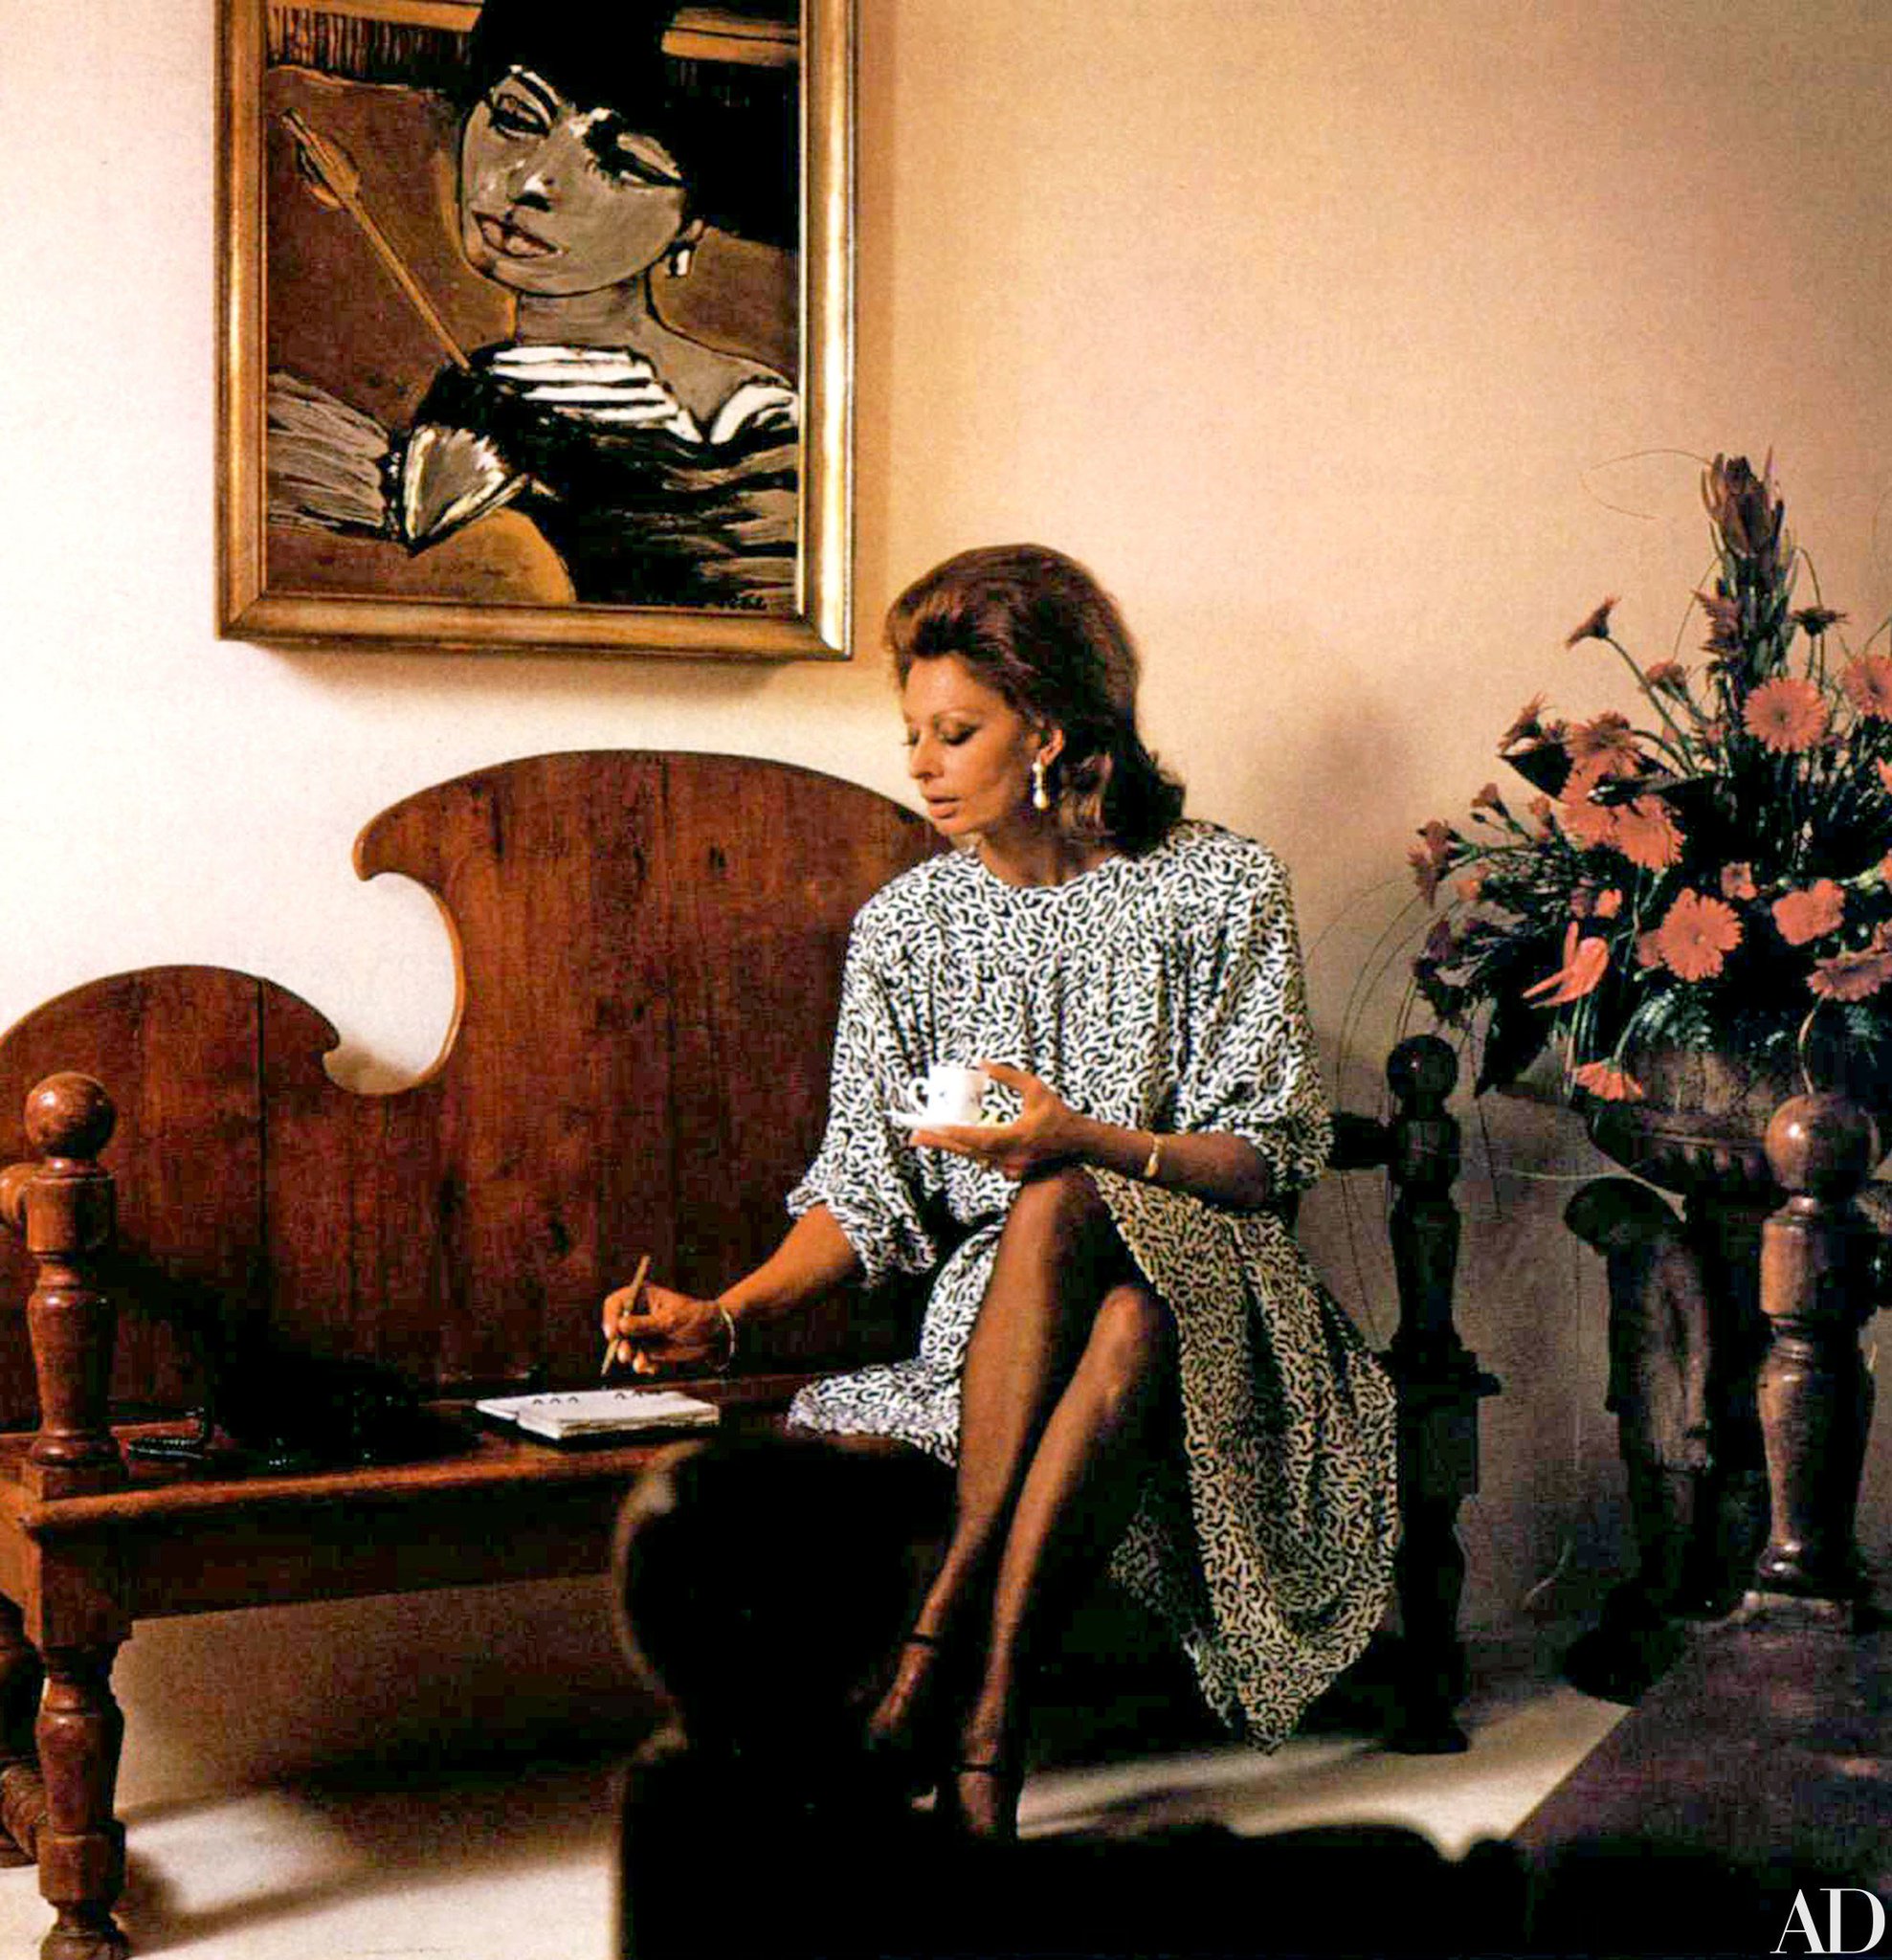 Happy birthday Soph! (...& a reminder that \"Sophia Loren at home\" is a mood to eternally strive for) 